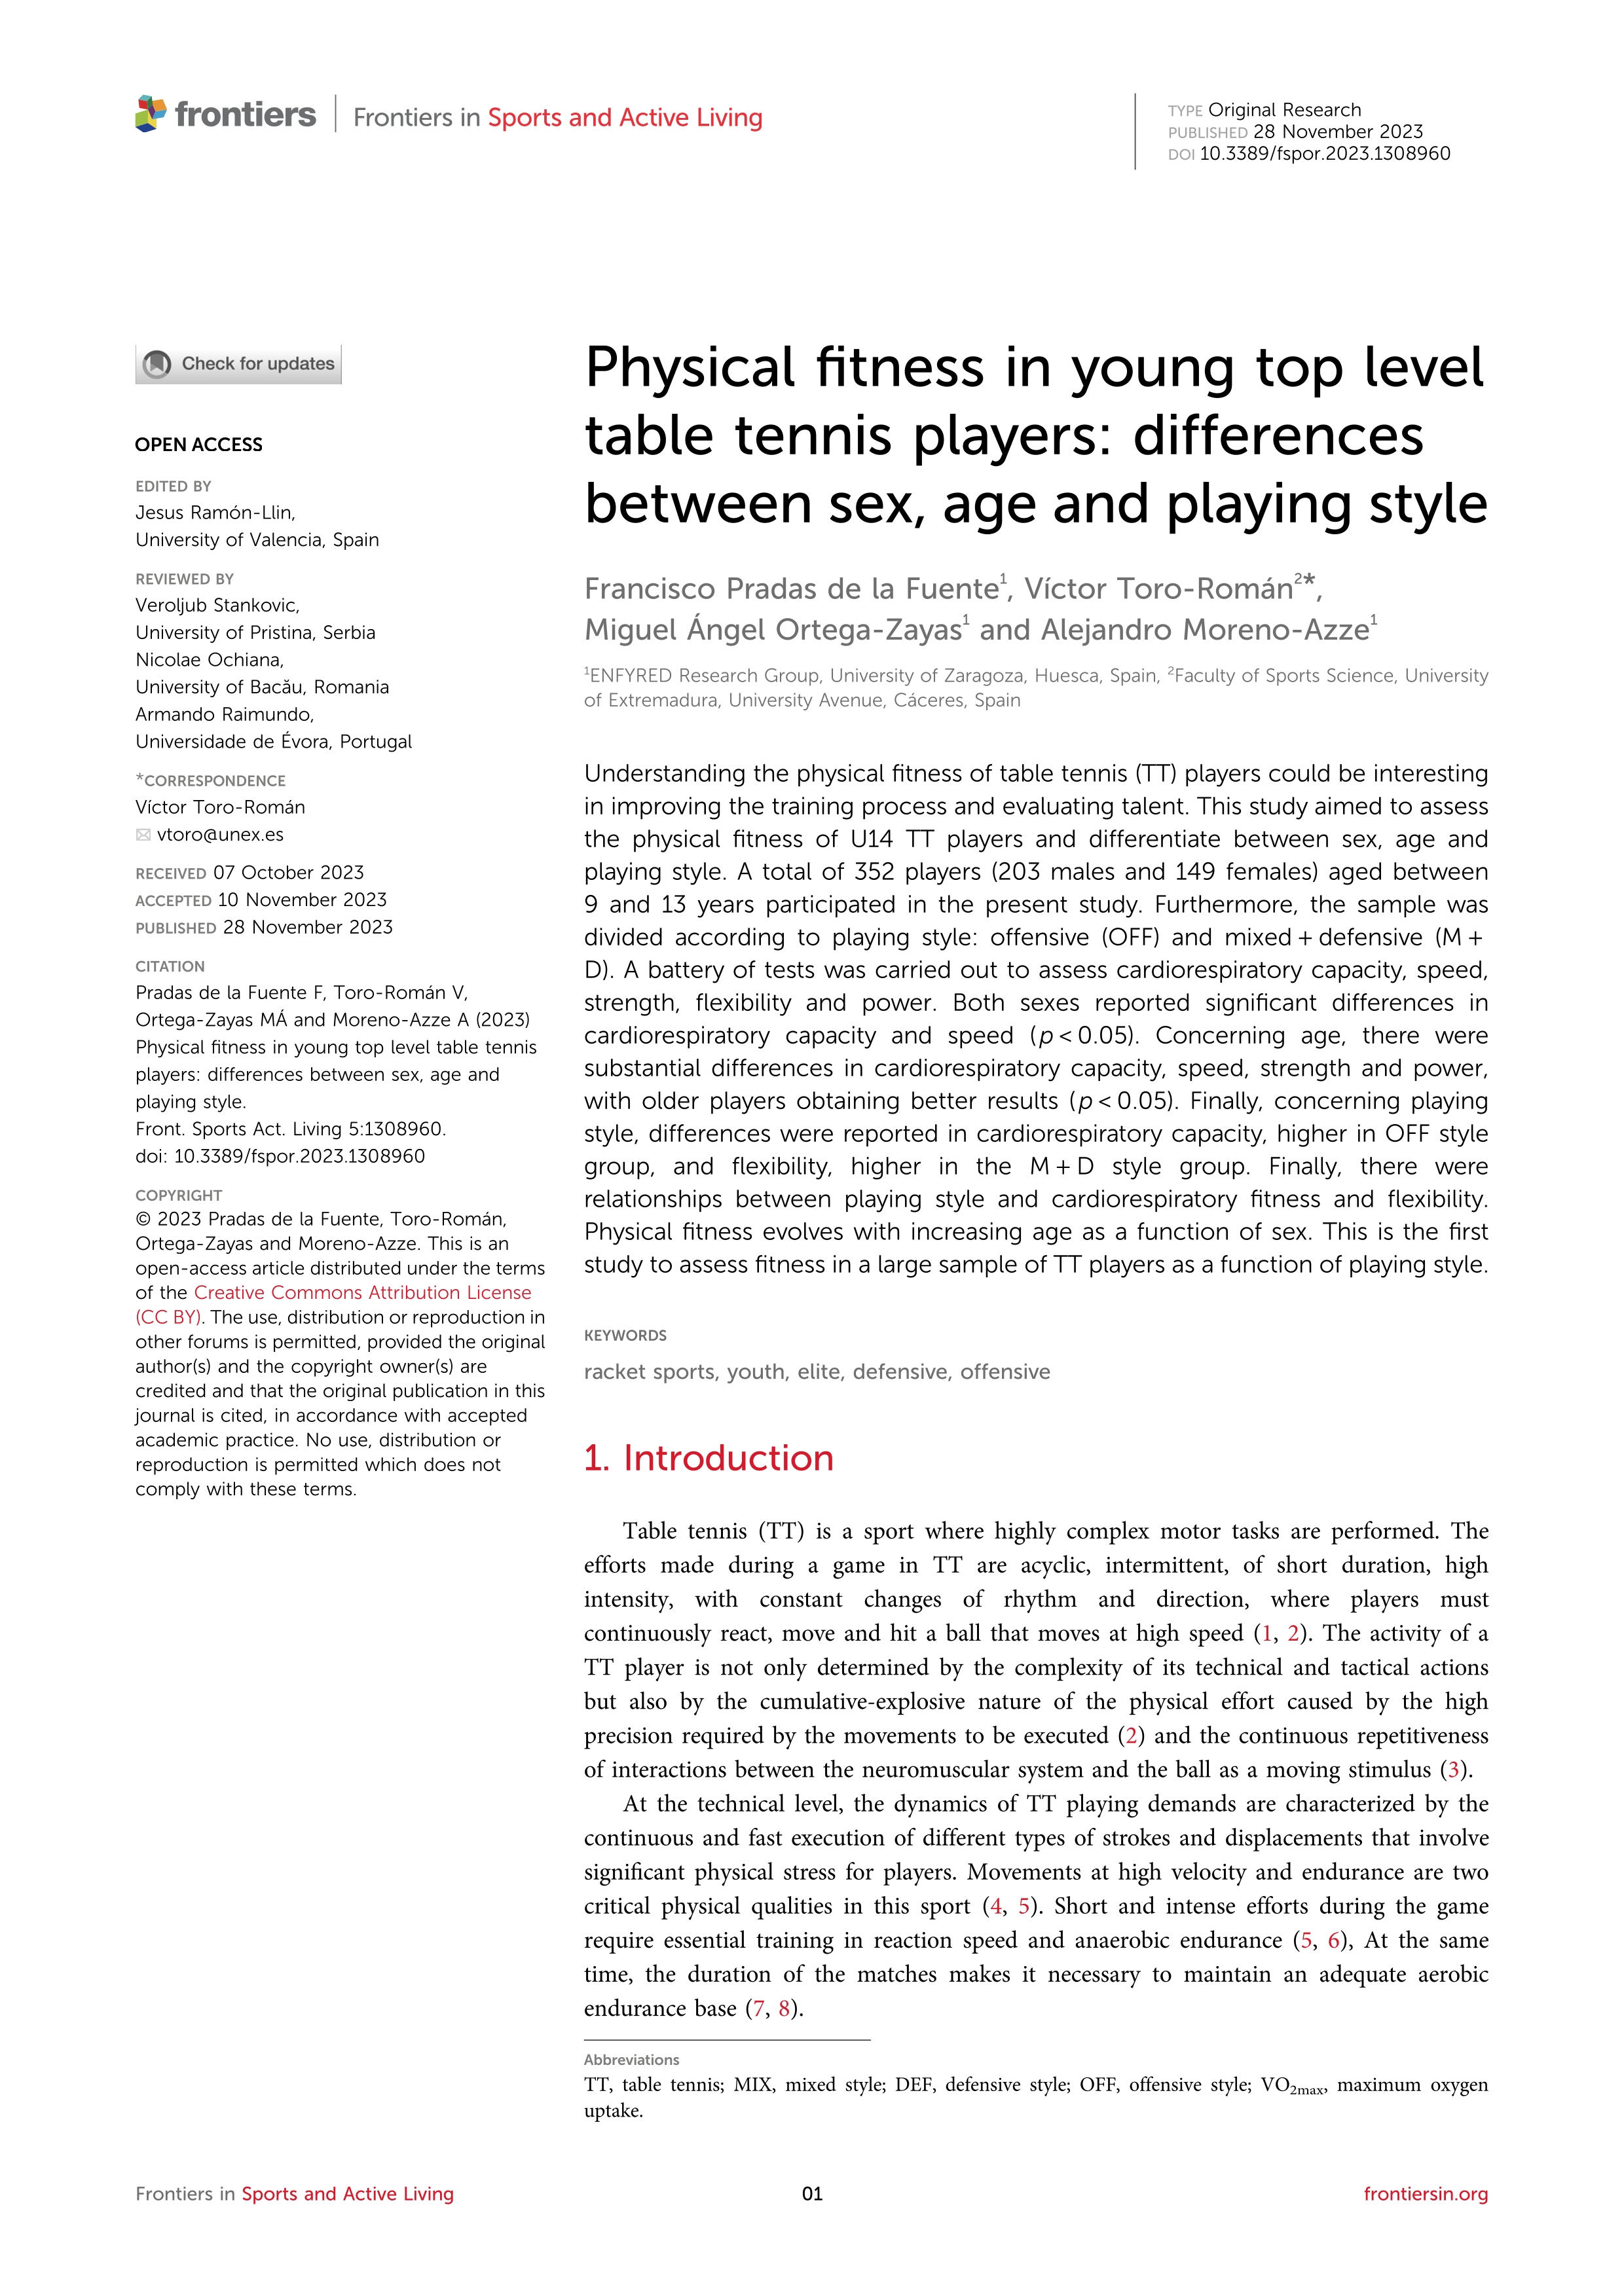 Physical fitness in young top level table tennis players: differences between sex, age and playing style